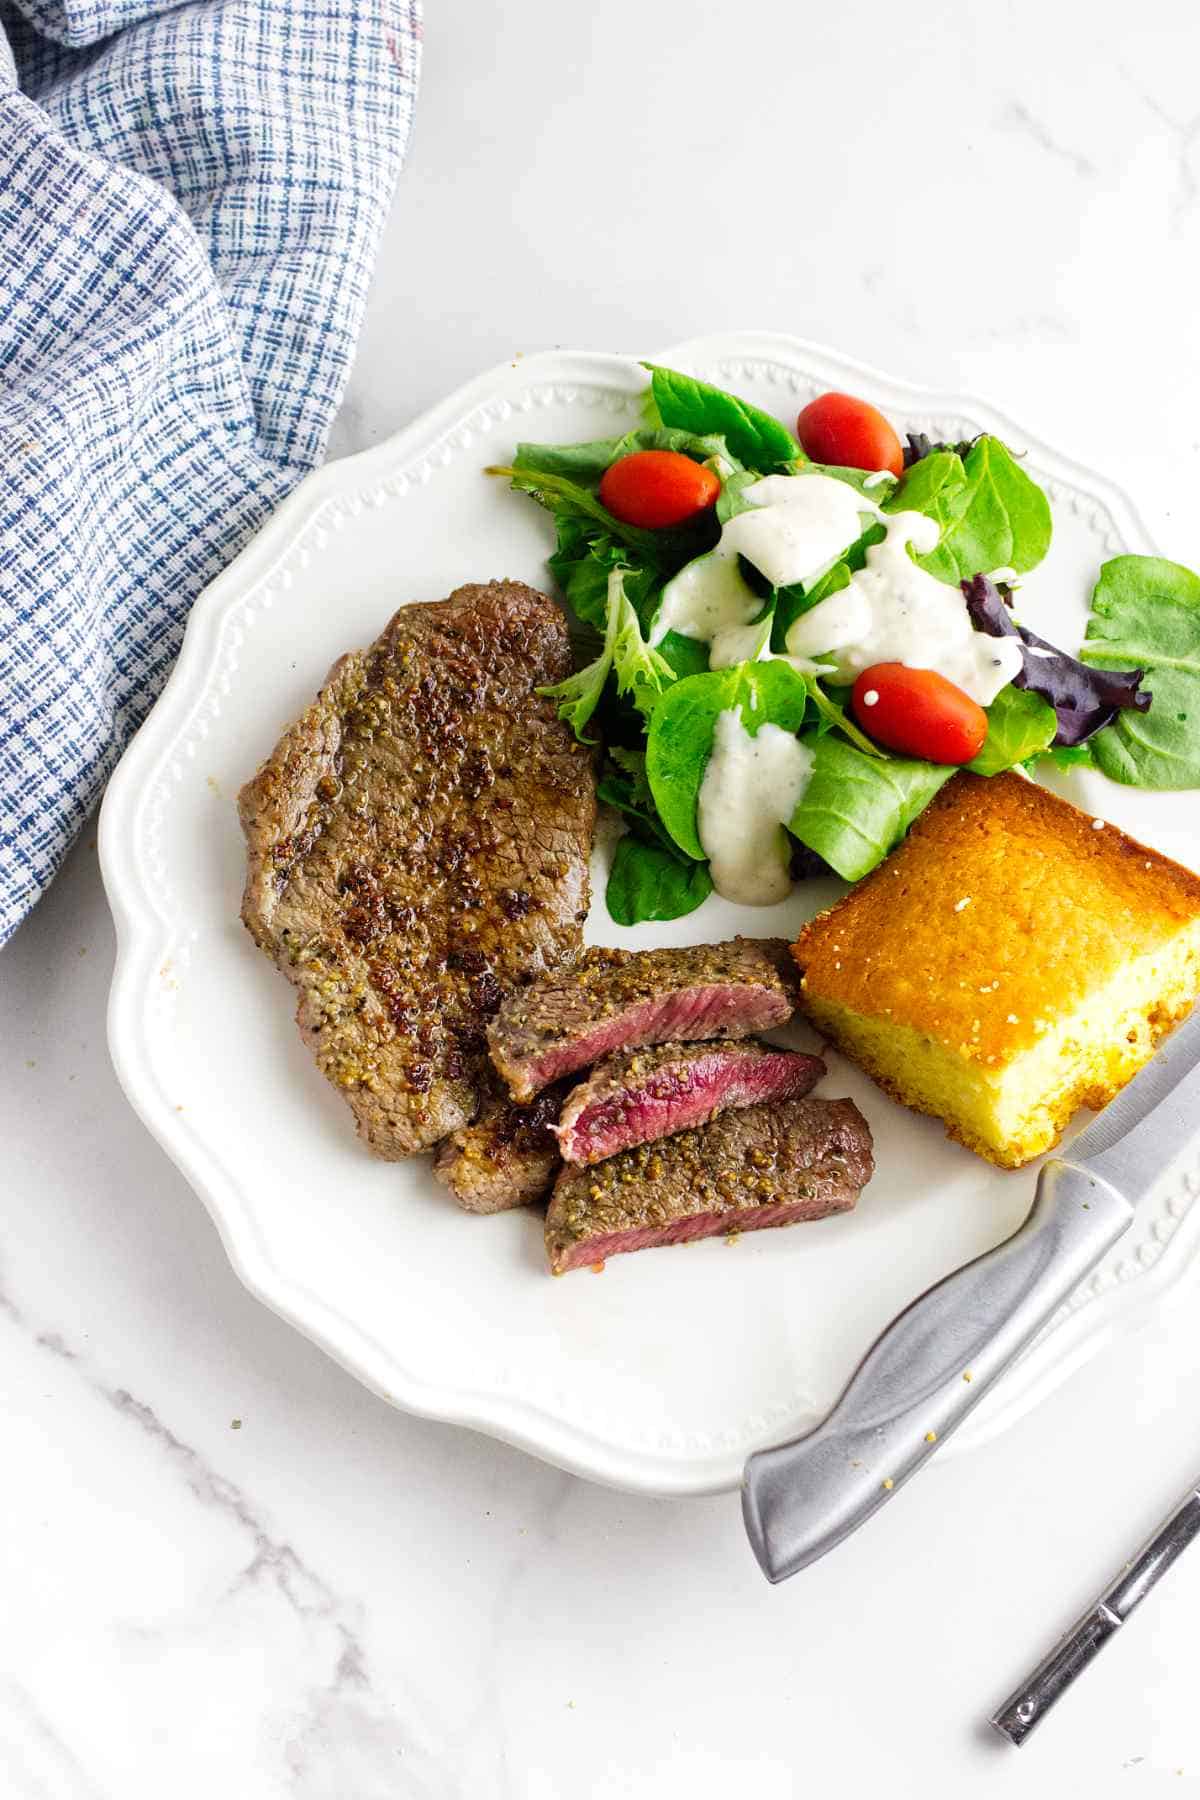 rare slices of Denver cut steak on a plate with salad and cornbread.